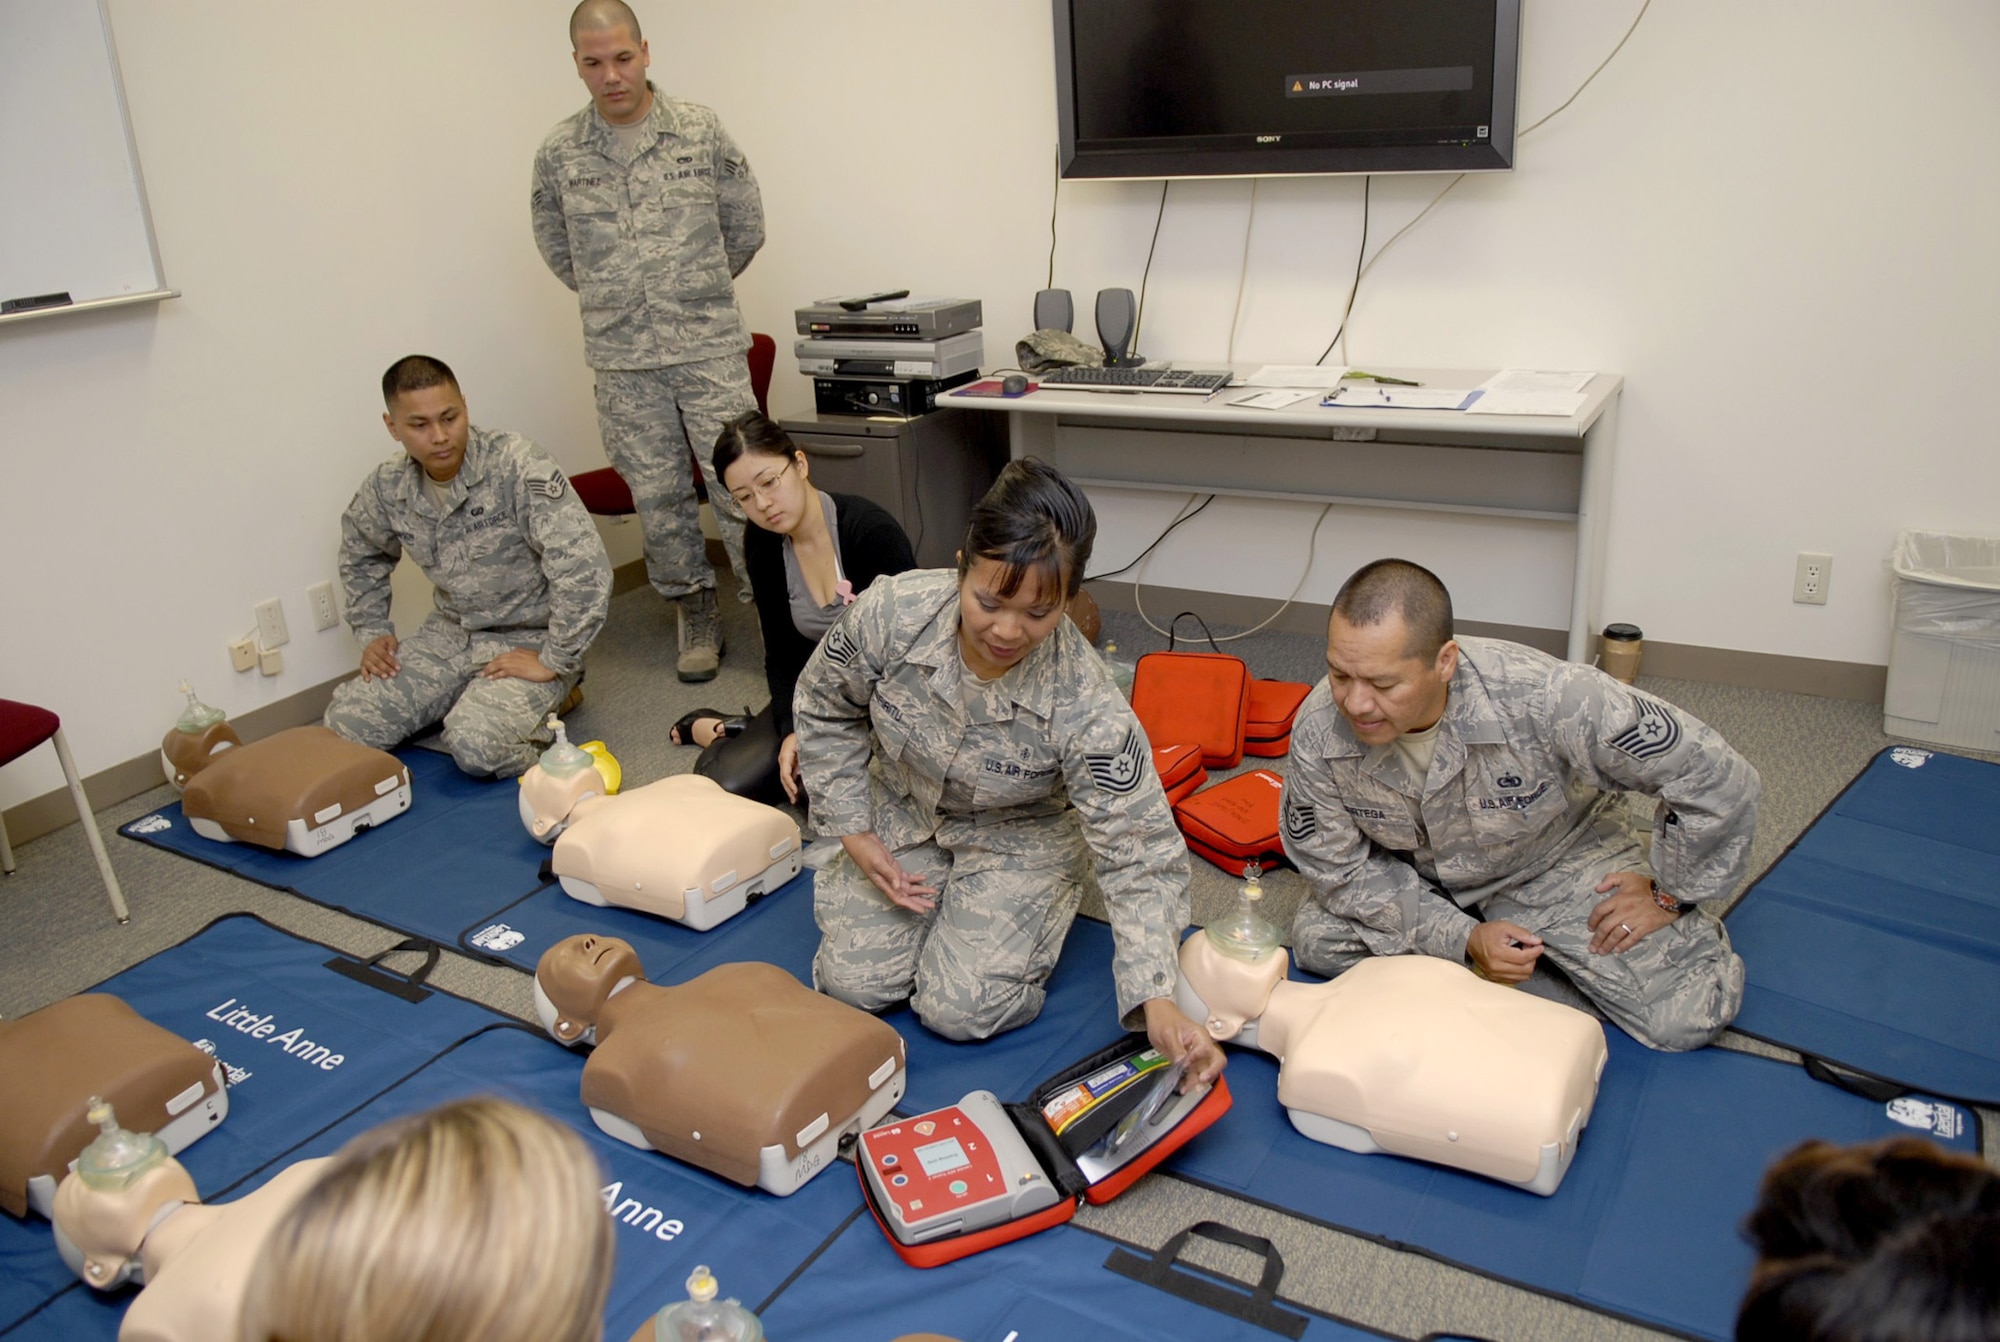 Tech. Sgt. Jeanette Espiritu demonstrates how to apply automated external defibrillator pads April 15, 2011, during a Heartsaver class at Kadena Air Base, Japan. Sergeant Espiritu is a basic life-support administrator who taught the use of AEDs during the class where students learned the new American Heart Association CPR method of administering immediate chest compressions. (U.S. Air Force photo/Airman 1st Class Tara A. Williamson)